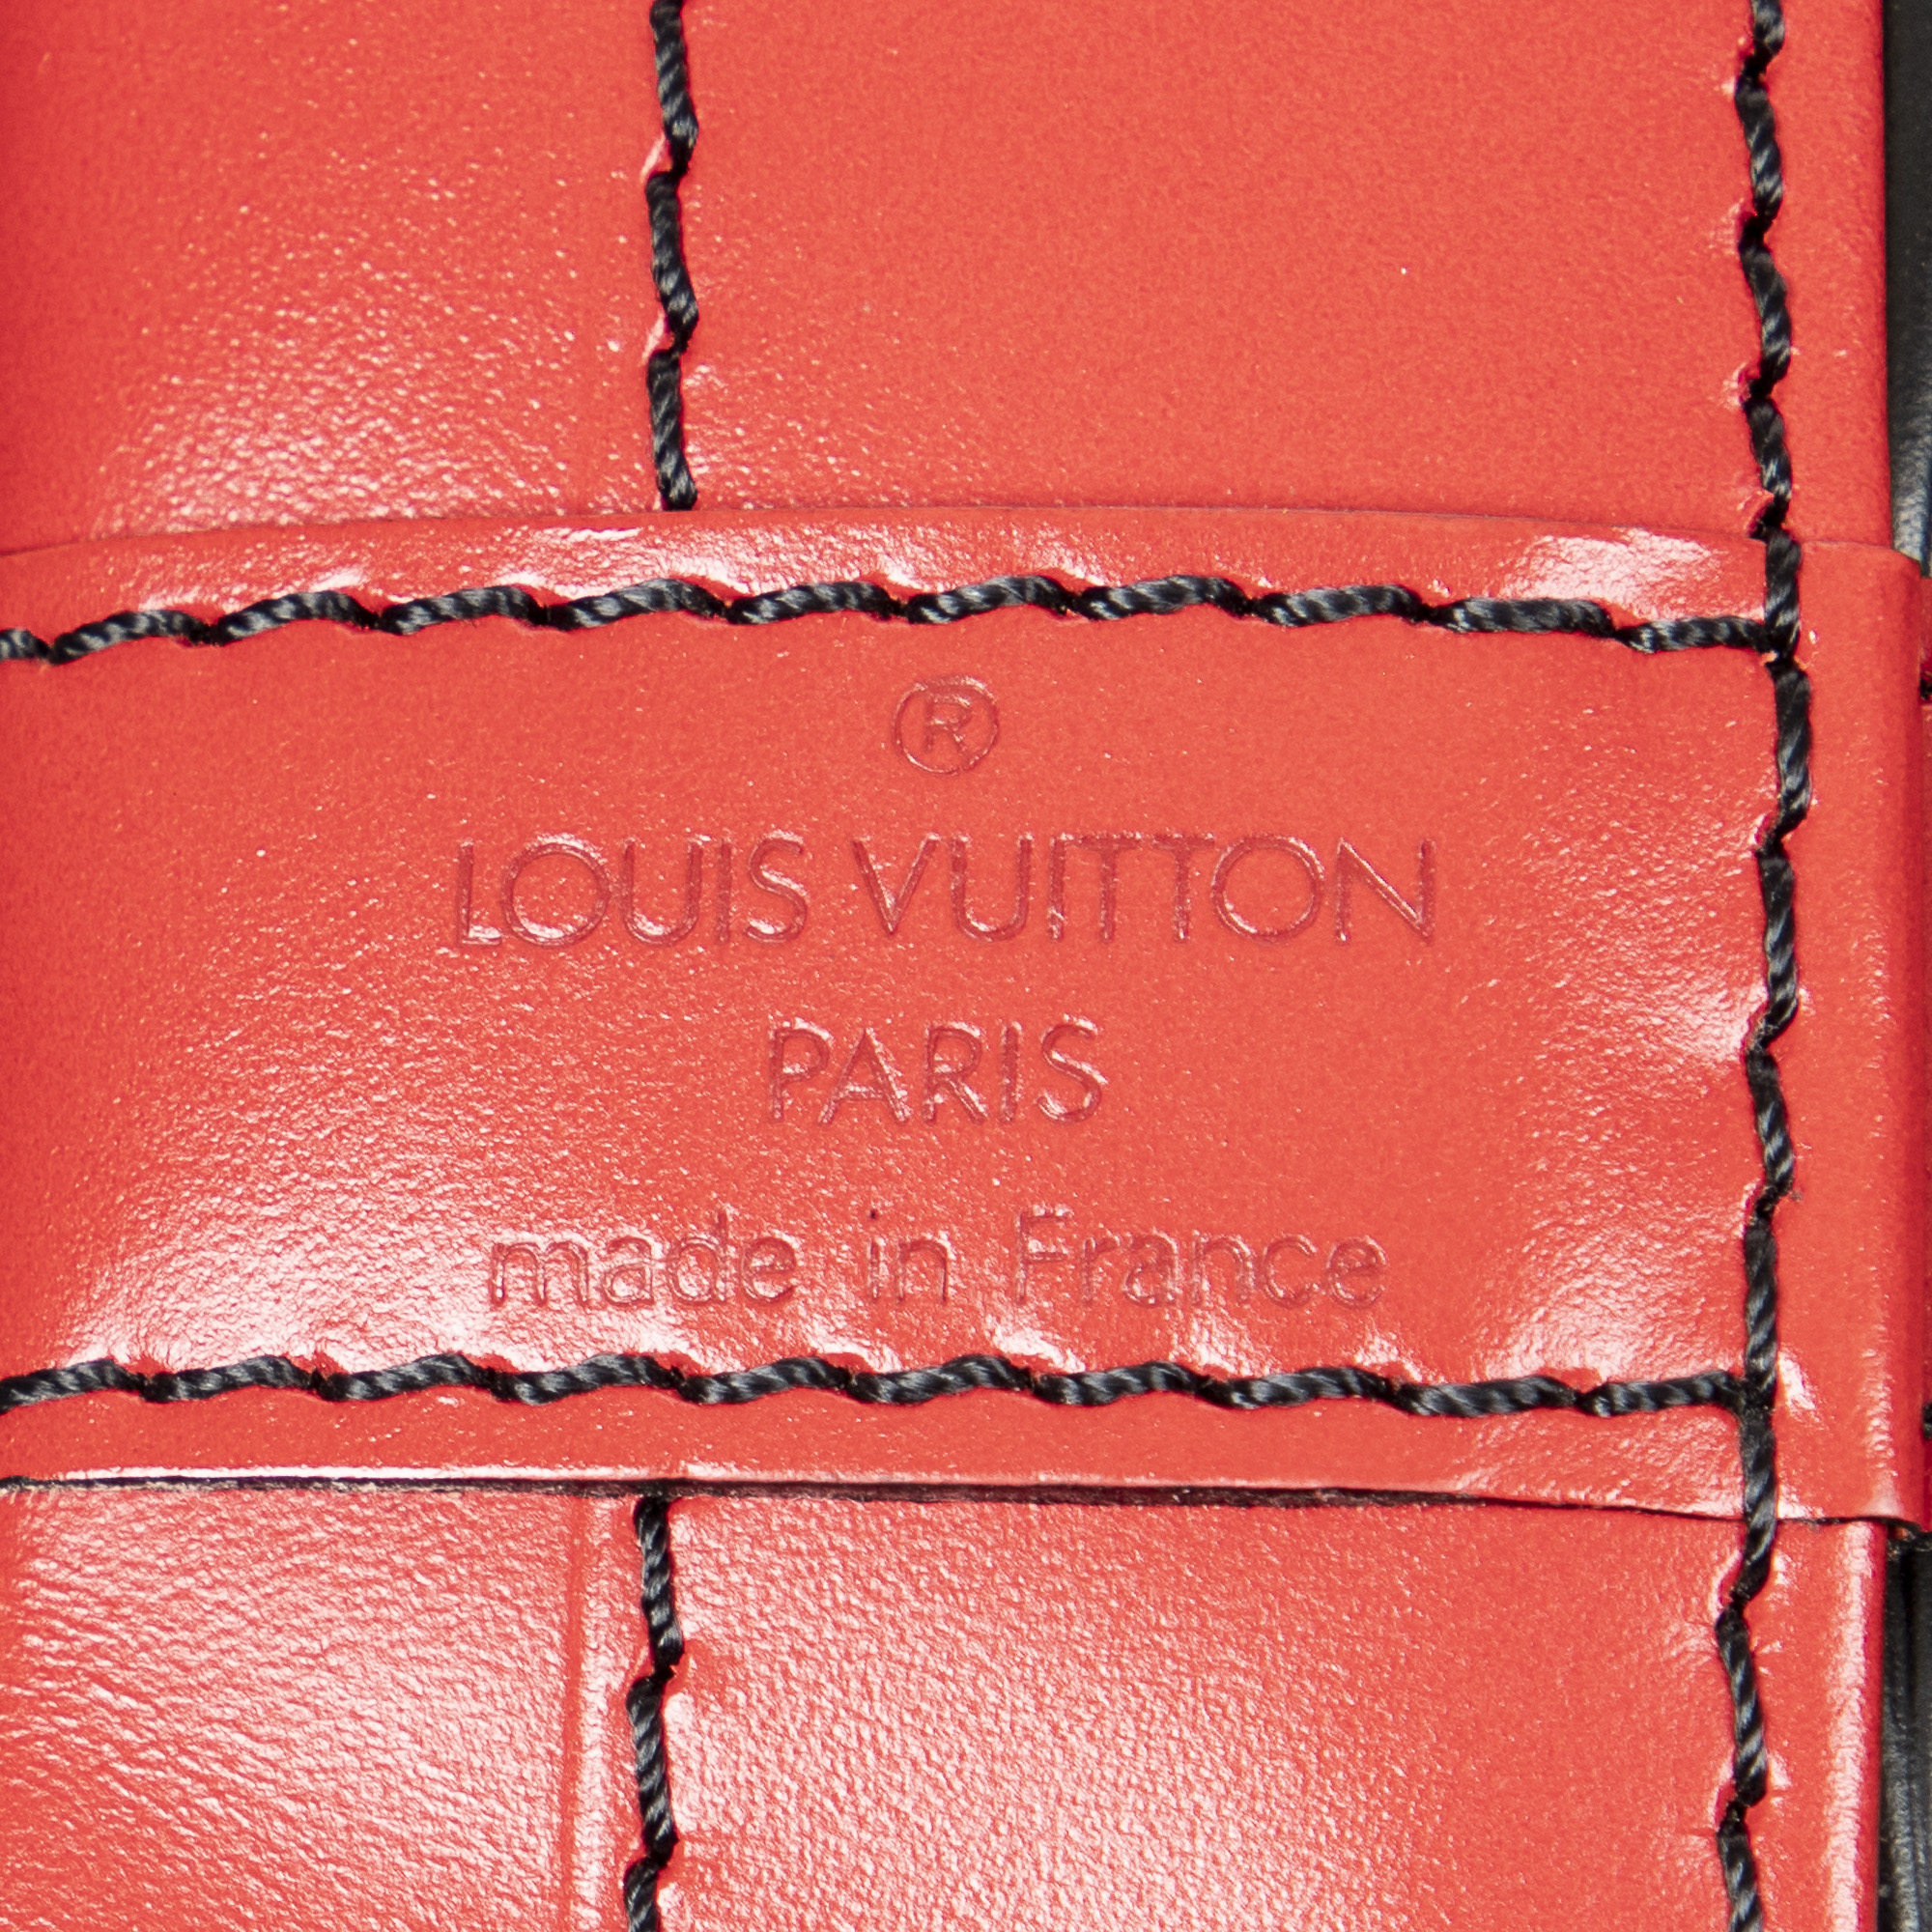 Louis Vuitton Noe Black Stitching Gm in Red